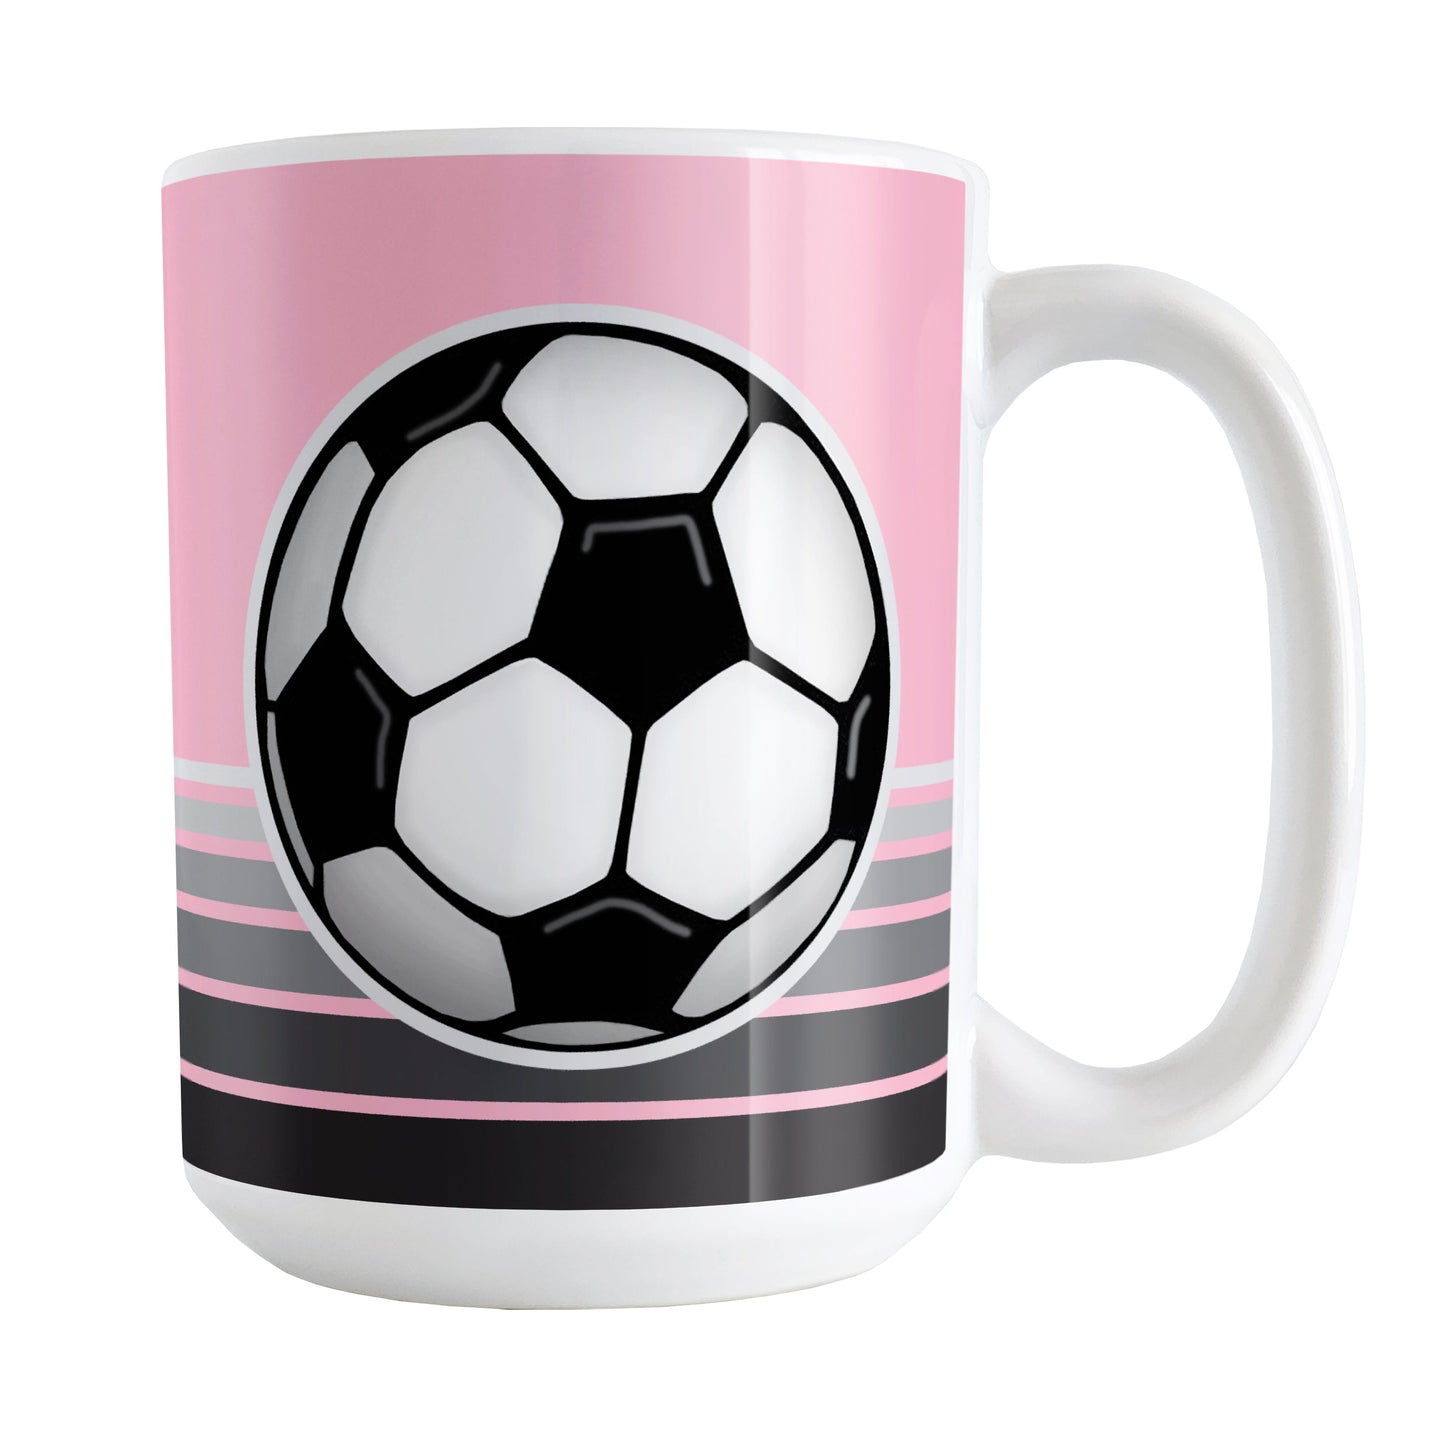 Gray Gradient Lined Pink Soccer Ball Mug (15oz) at Amy's Coffee Mugs. A ceramic coffee mug designed with a big soccer ball on both sides of the mug over gradient black to gray lines along the bottom over a pink background color that wraps around the mug up to the handle.